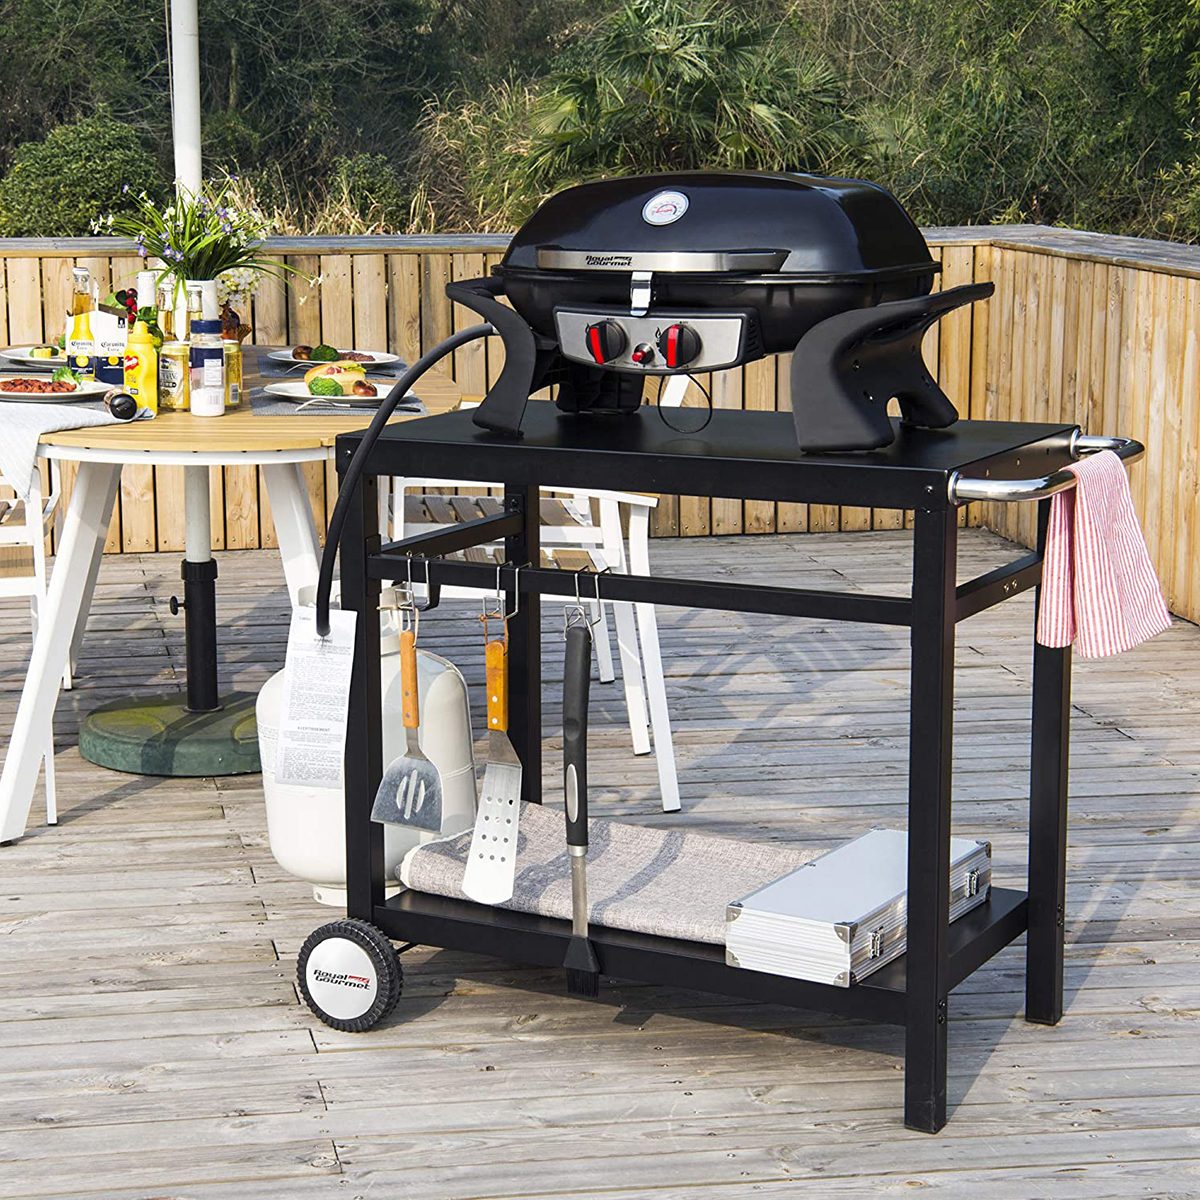 Outdoor Grill Table: Buying Guide & 6 Best Brands of 2023